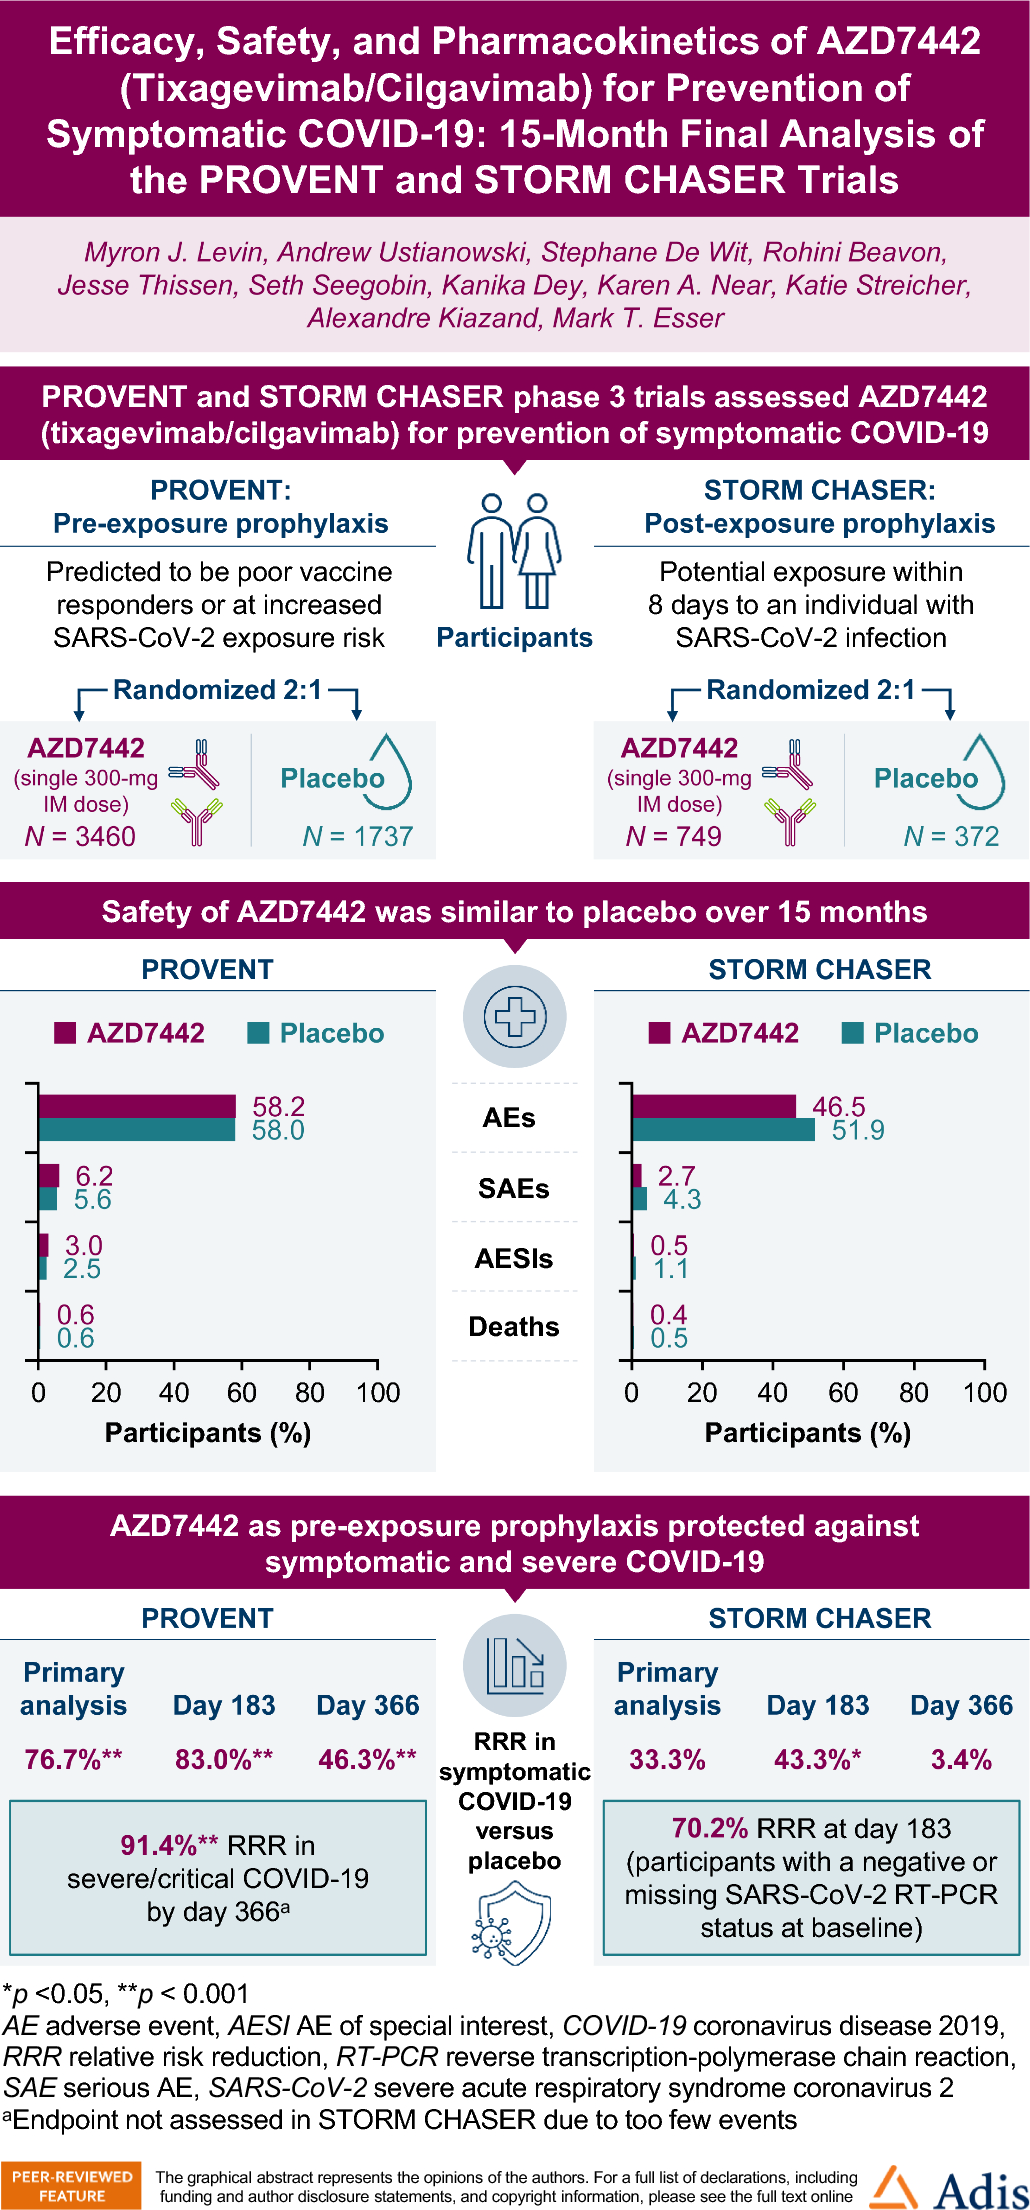 Efficacy, Safety, and Pharmacokinetics of AZD7442 (Tixagevimab/Cilgavimab) for Prevention of Symptomatic COVID-19: 15-Month Final Analysis of the PROVENT and STORM CHASER Trials